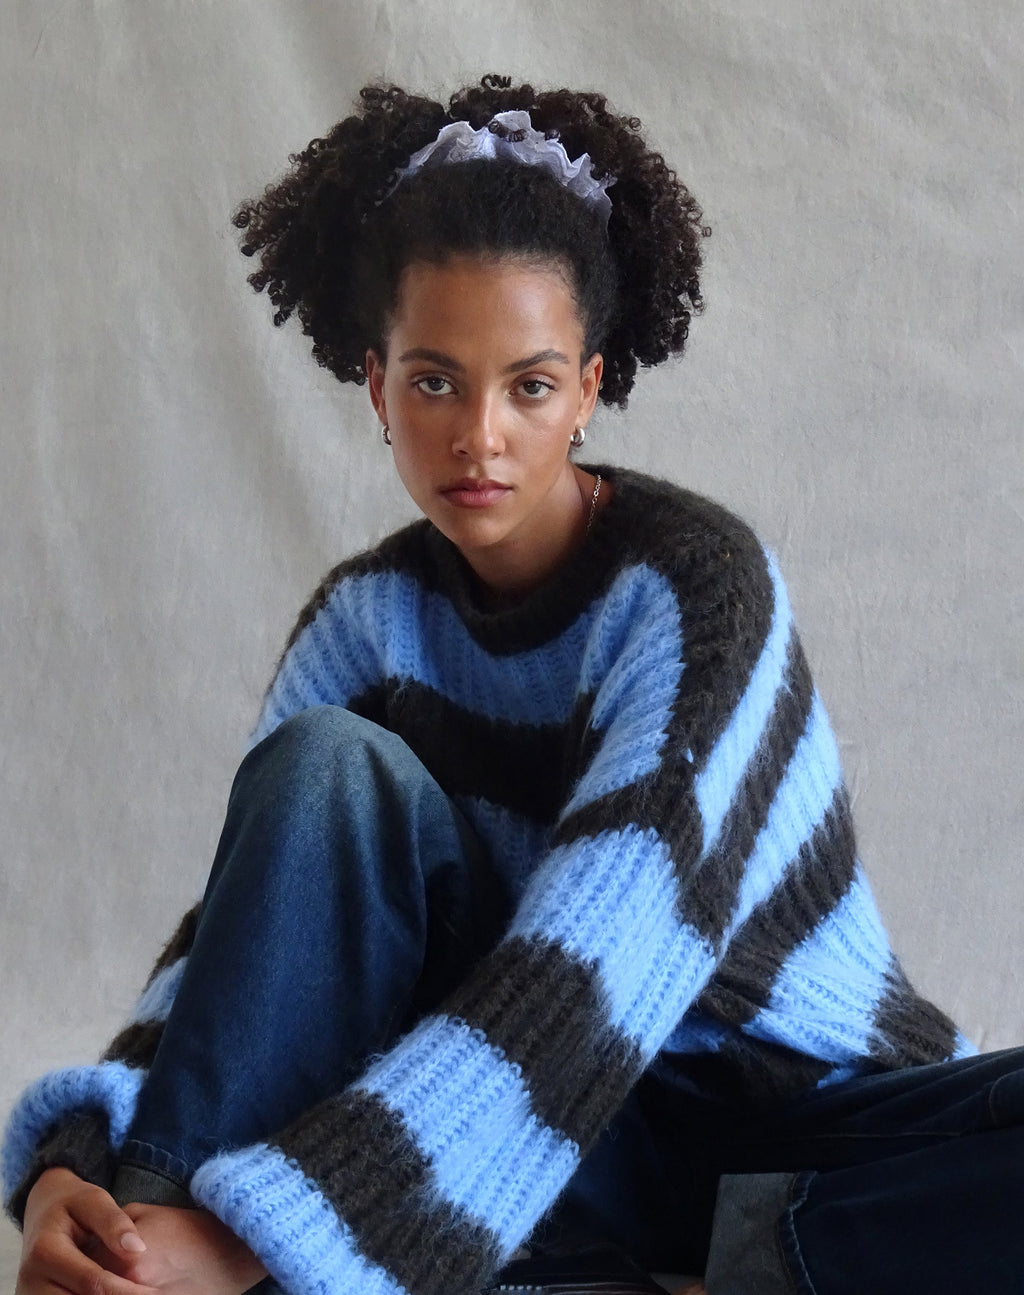 Daren Knitted Oversized Jumper in Brown and Blue Stripe